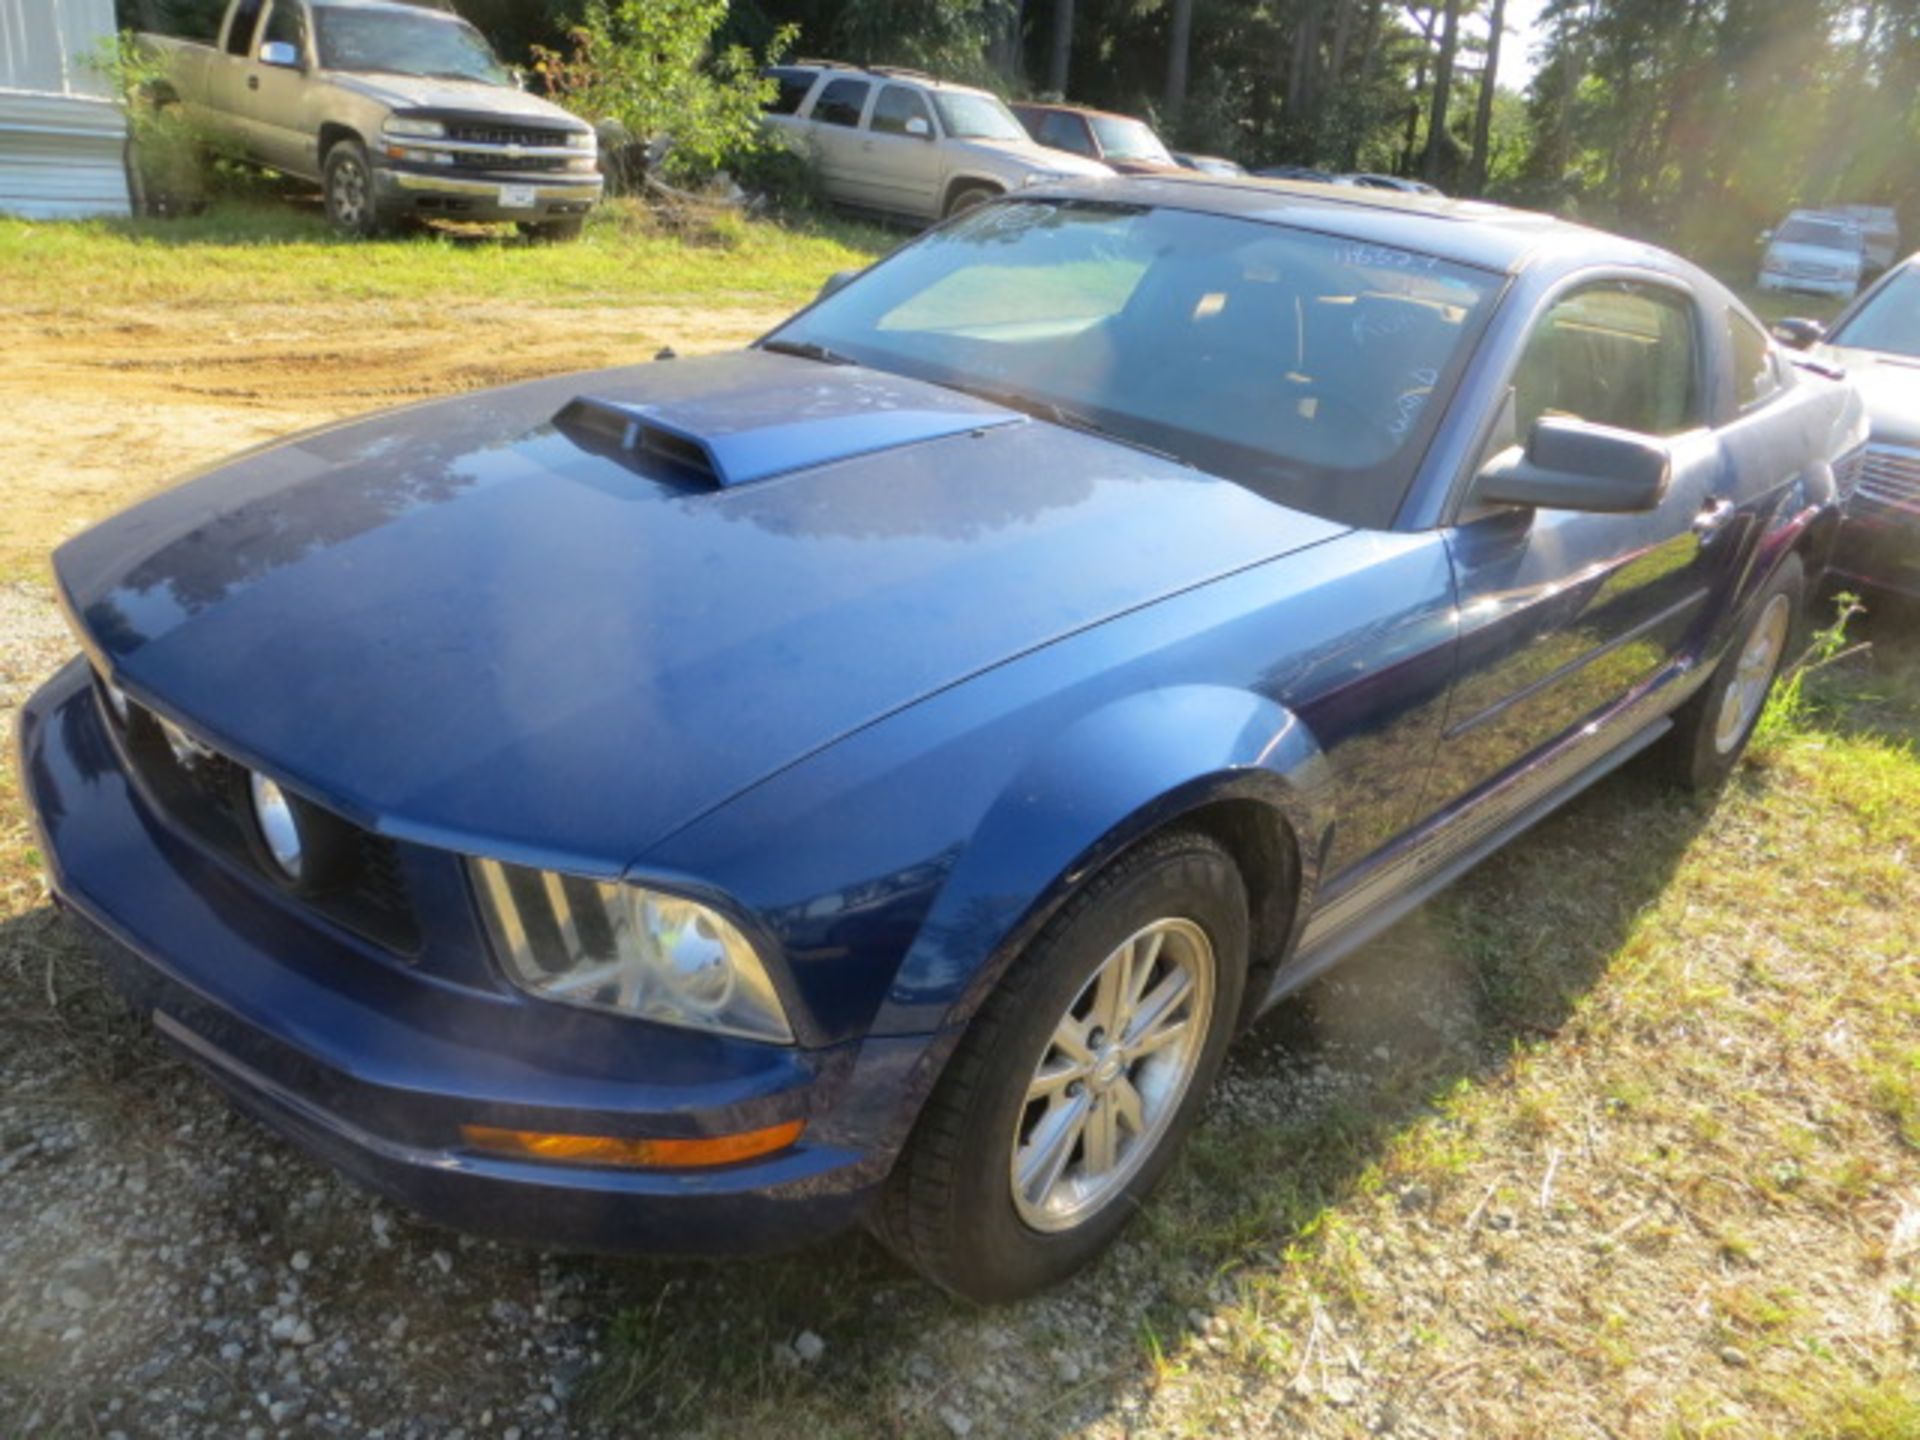 2008 Ford Mustang-NEEDS ALIGNMENT 115000 MILES,VIN 1ZVHT80N385181367, SOLD WITH TRANSFERABLE TITLE - Image 2 of 3